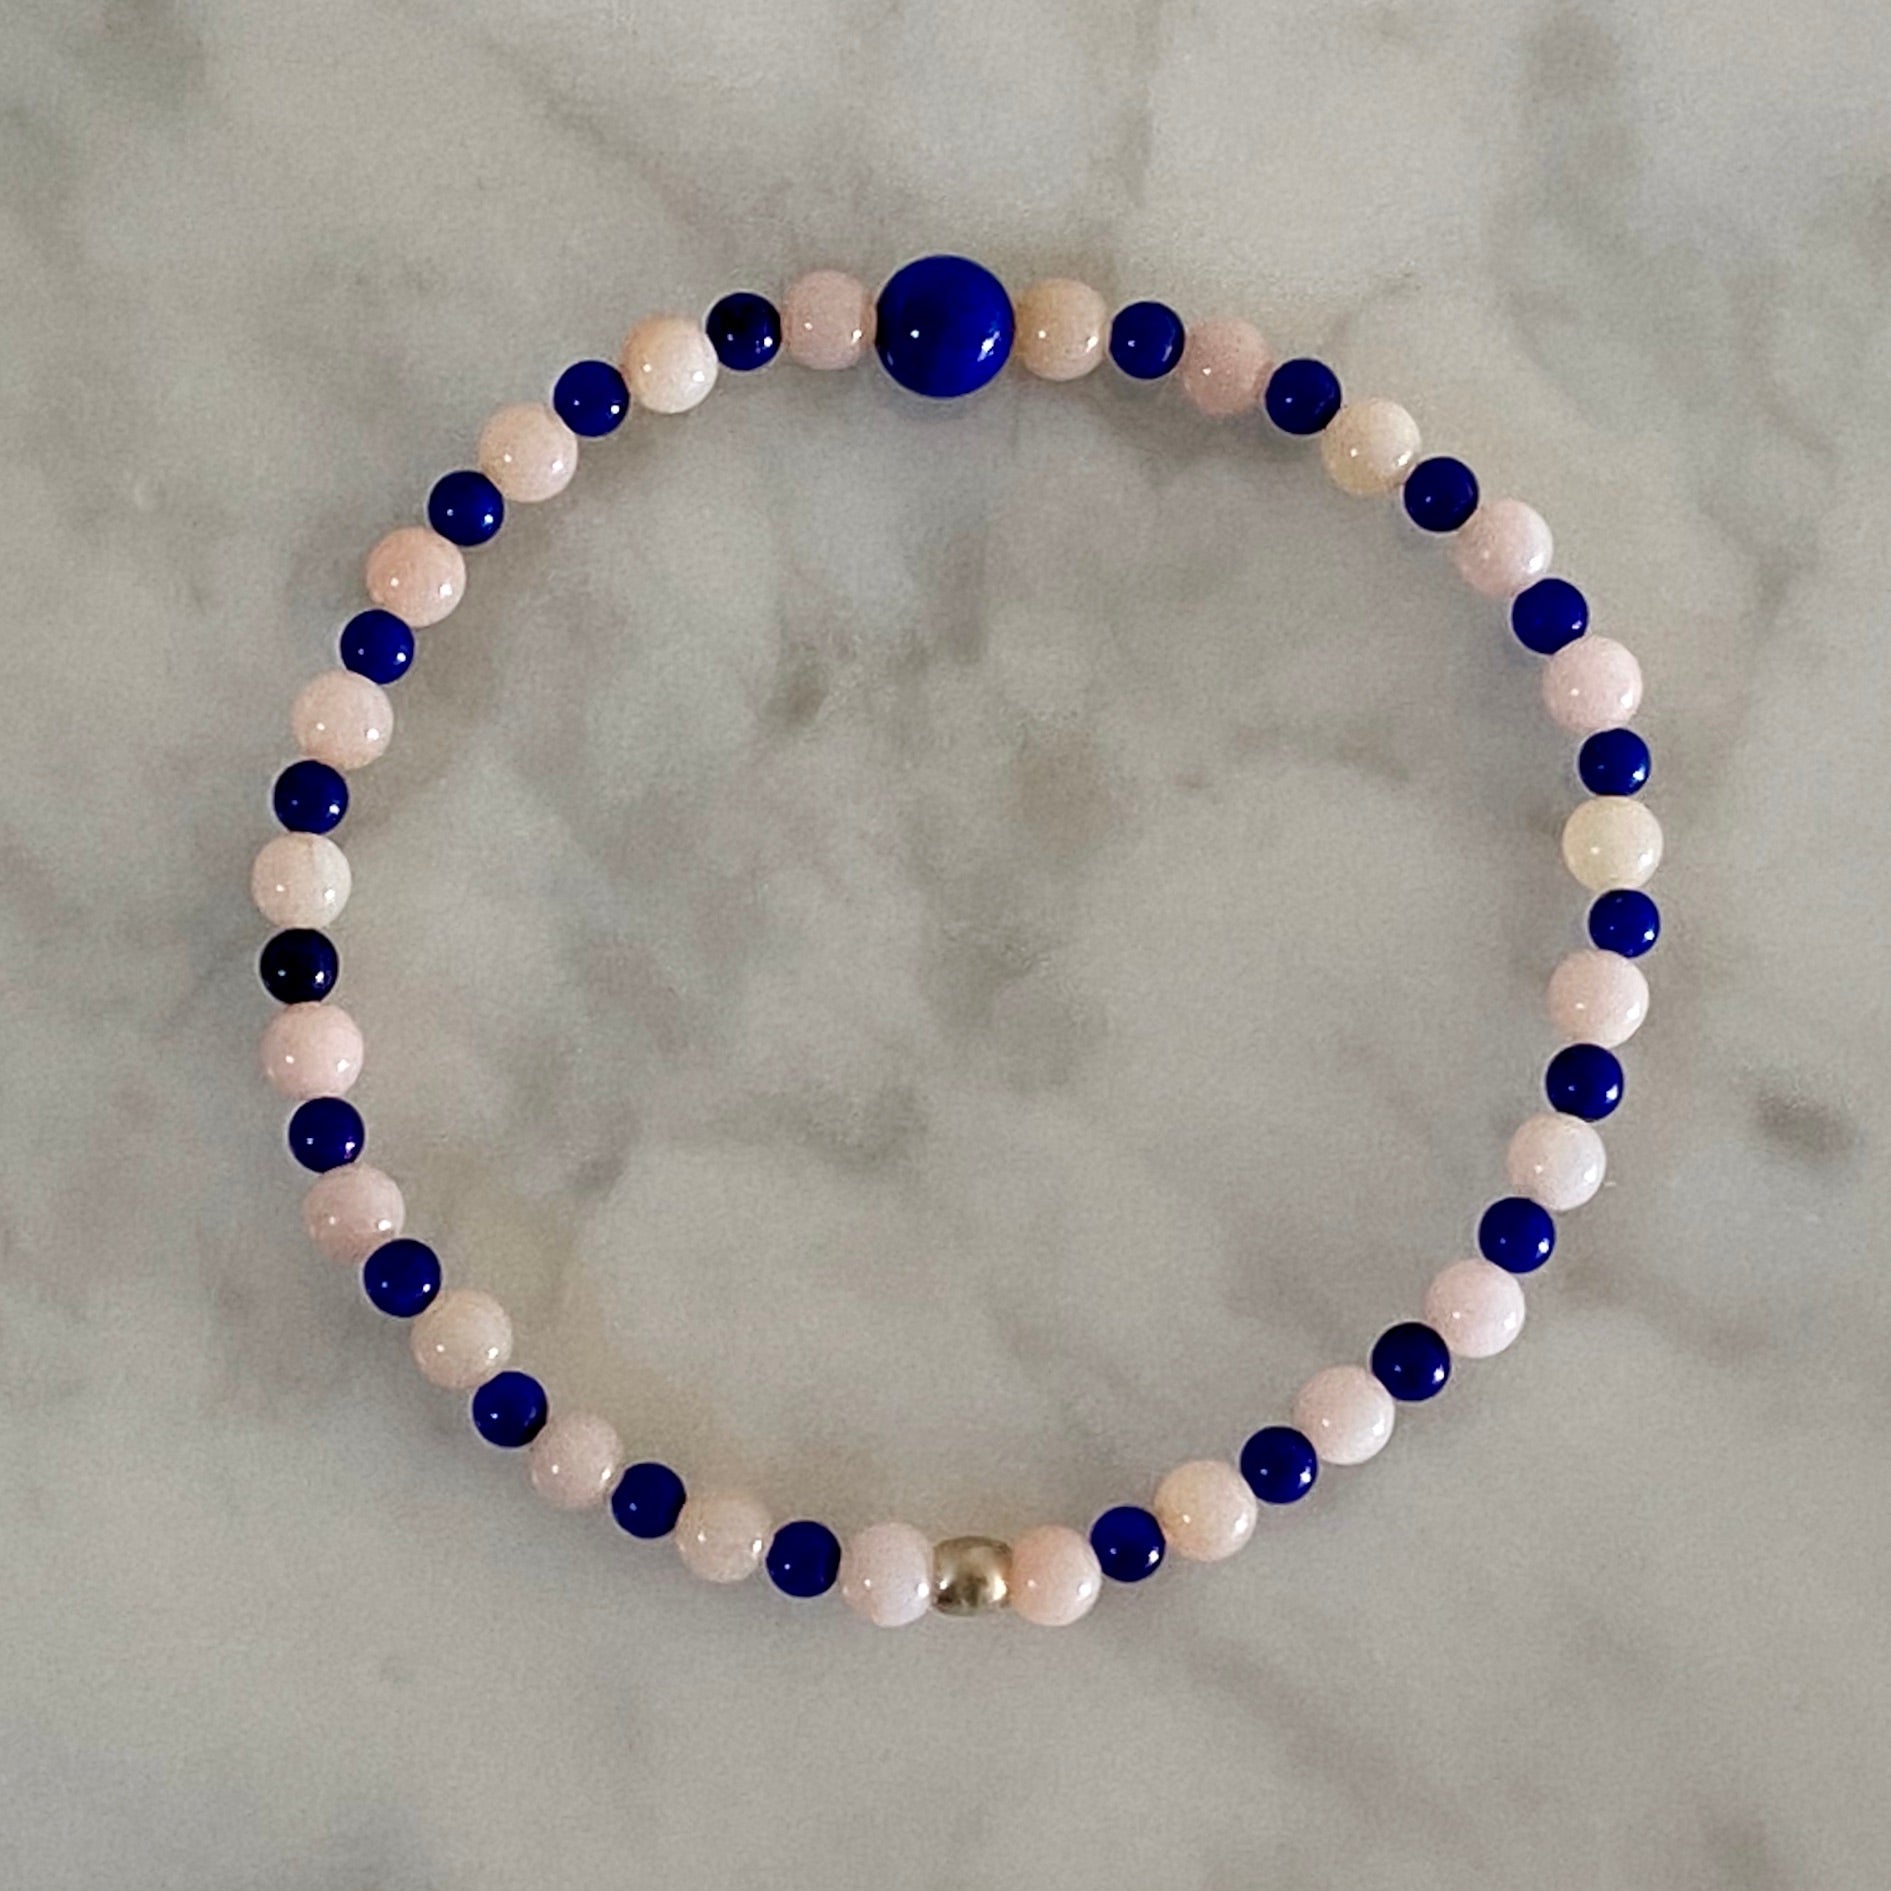 Arpaia 7" stretch bracelet with Pink Peruvian Opals and Lapis Lazuli